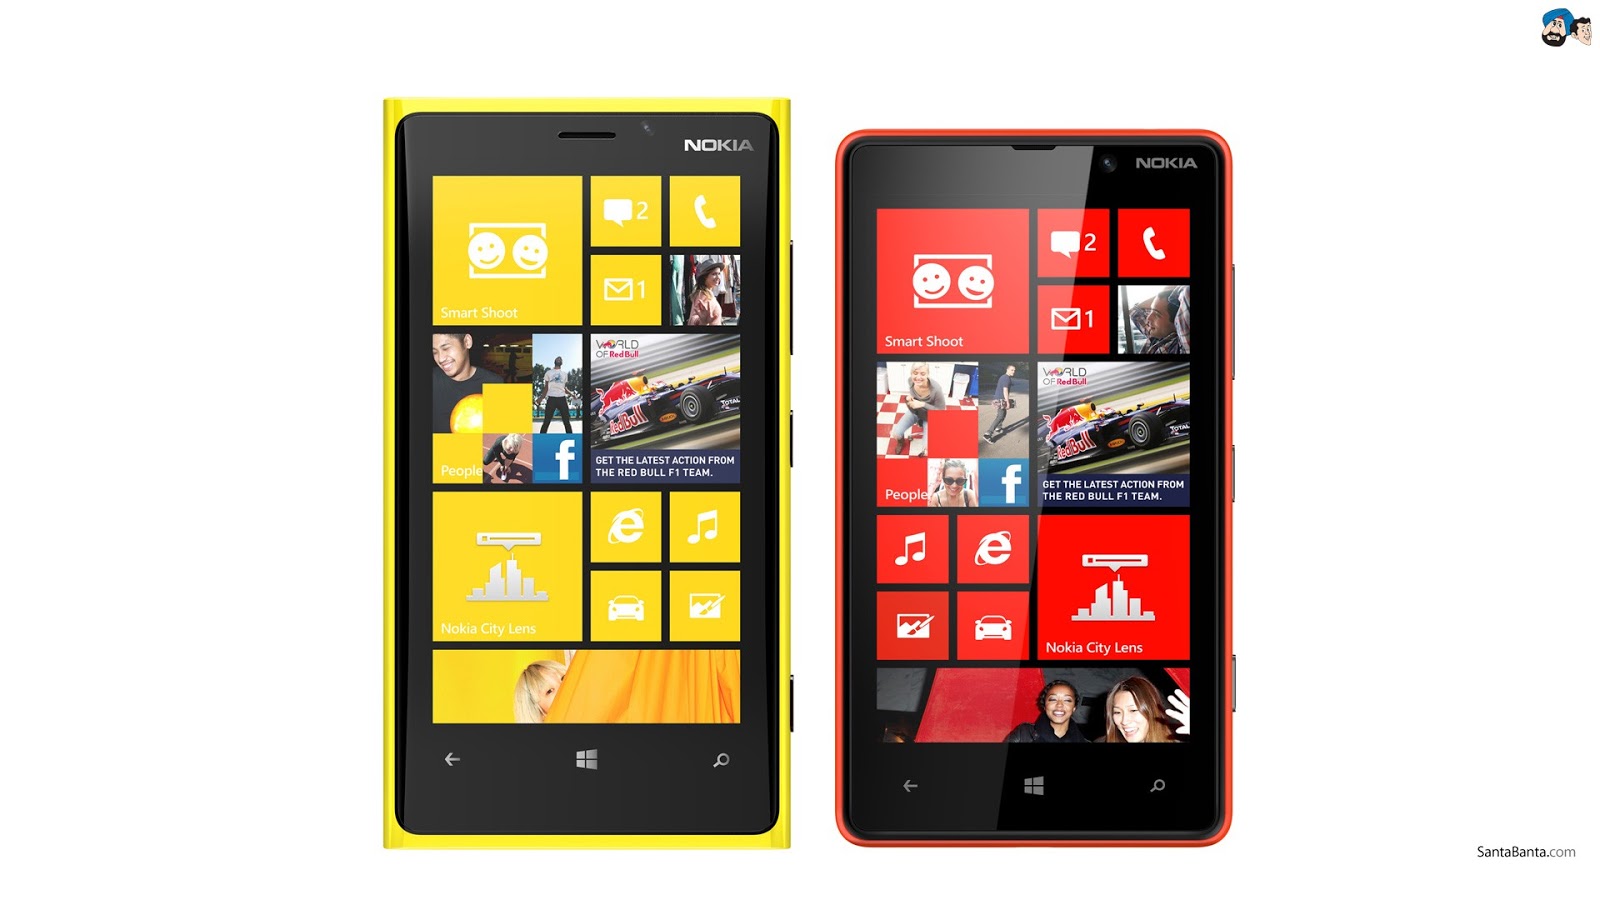 HD Wallpaper For Lumia On